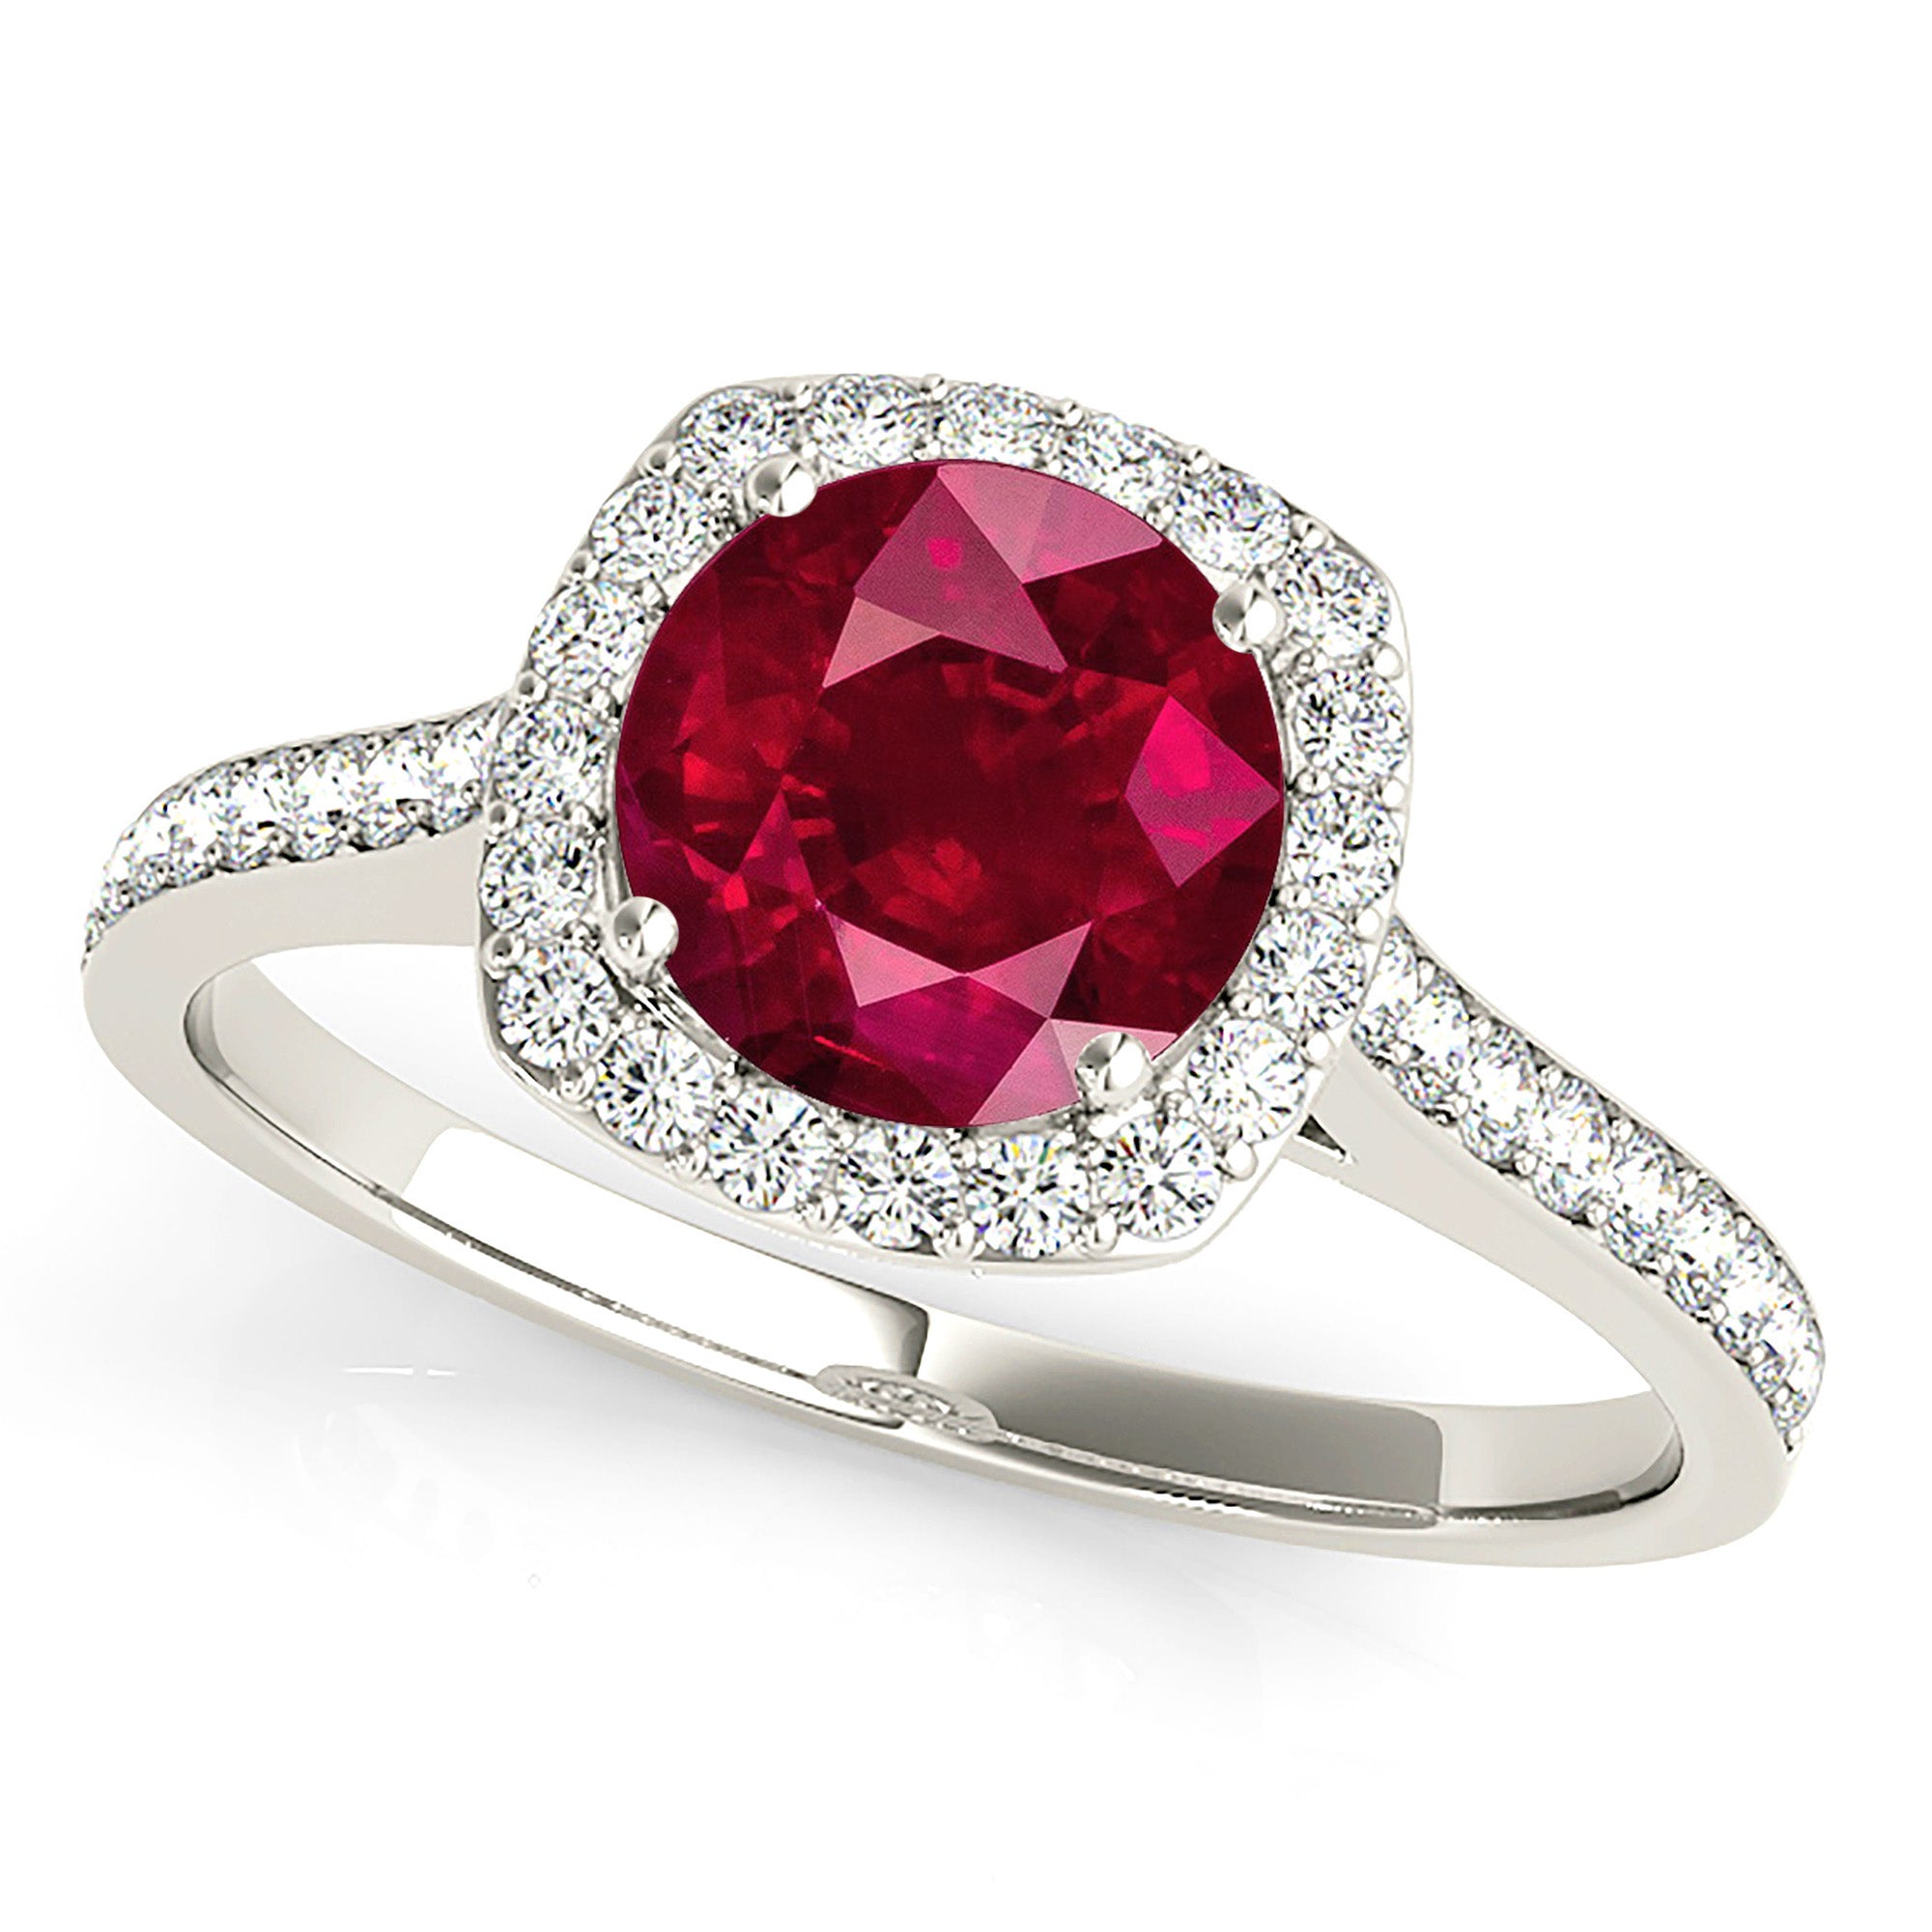 1.45 ct. Genuine Ruby Ring With 0.35 ctw. Diamond Cushion Halo And Delicate Diamond Band-in 14K/18K White, Yellow, Rose Gold and Platinum - Christmas Jewelry Gift -VIRABYANI